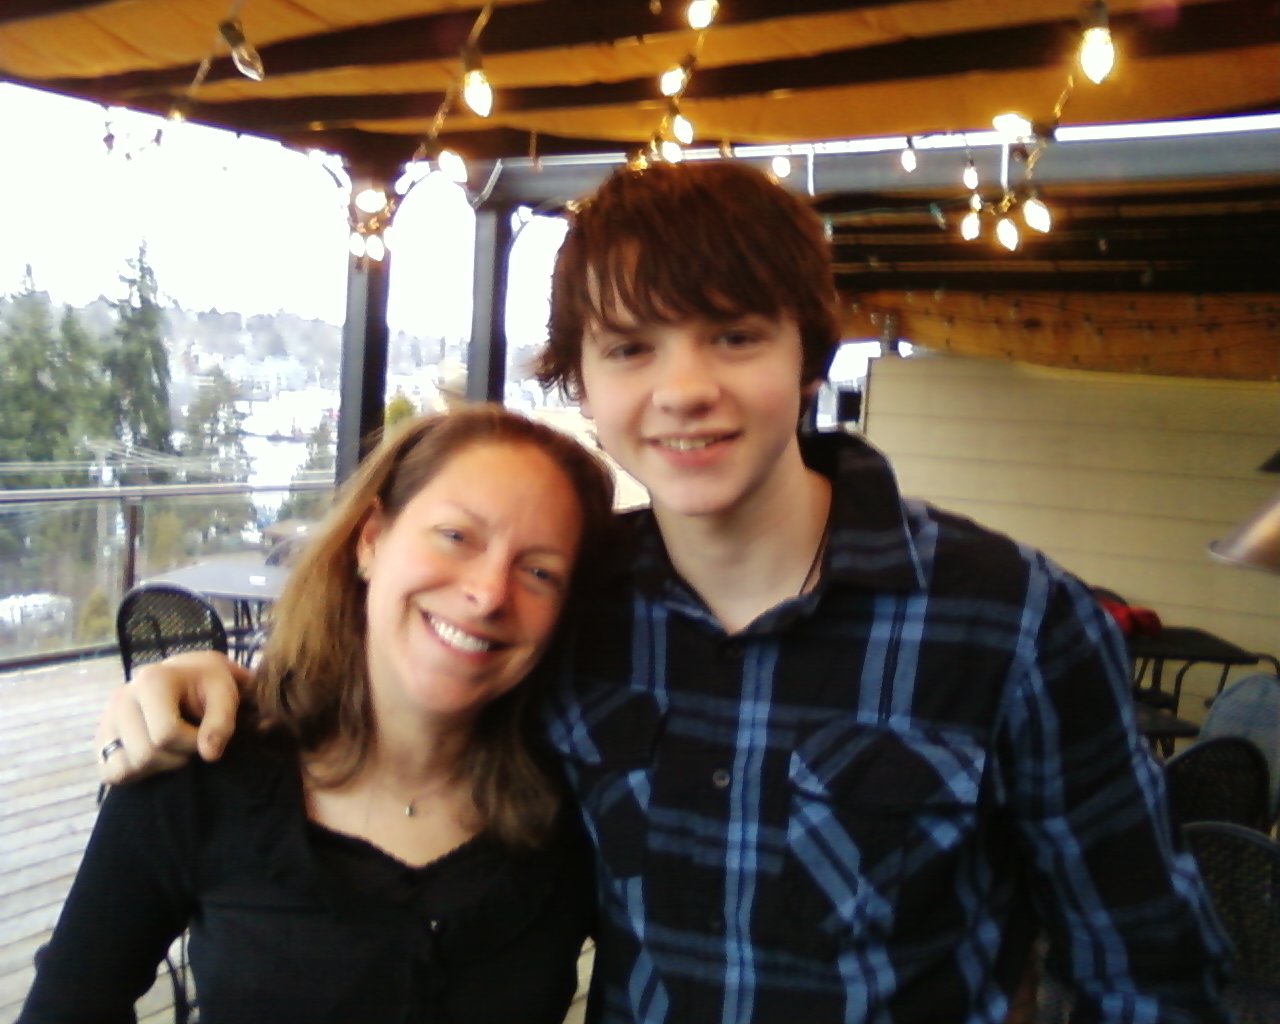 At lunch with the talented Joel Courtney. http://www.imdb.com/name/nm1525807/